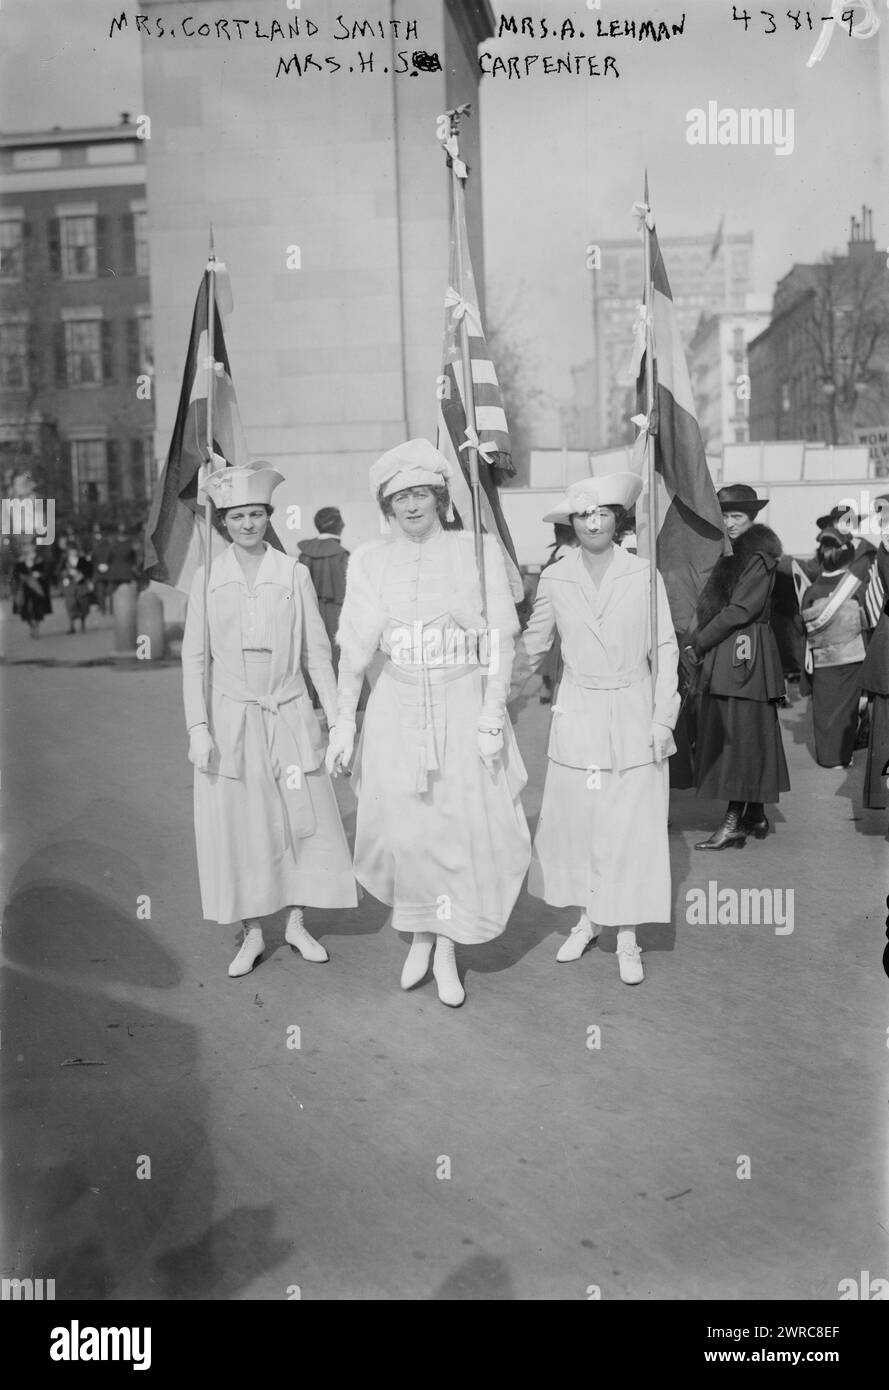 Mrs. Cortland Smith, Mrs. A. Lehman, Mrs. H.S. Carpenter, Photo shows Mrs. Cortland Smith, Mrs. A. Lehman, and Mrs. Herbert S. Carpenter carrying flags in suffrage parade, New York City, Oct. 27, 1917., 1917 Oct. 27, Glass negatives, 1 negative: glass Stock Photo